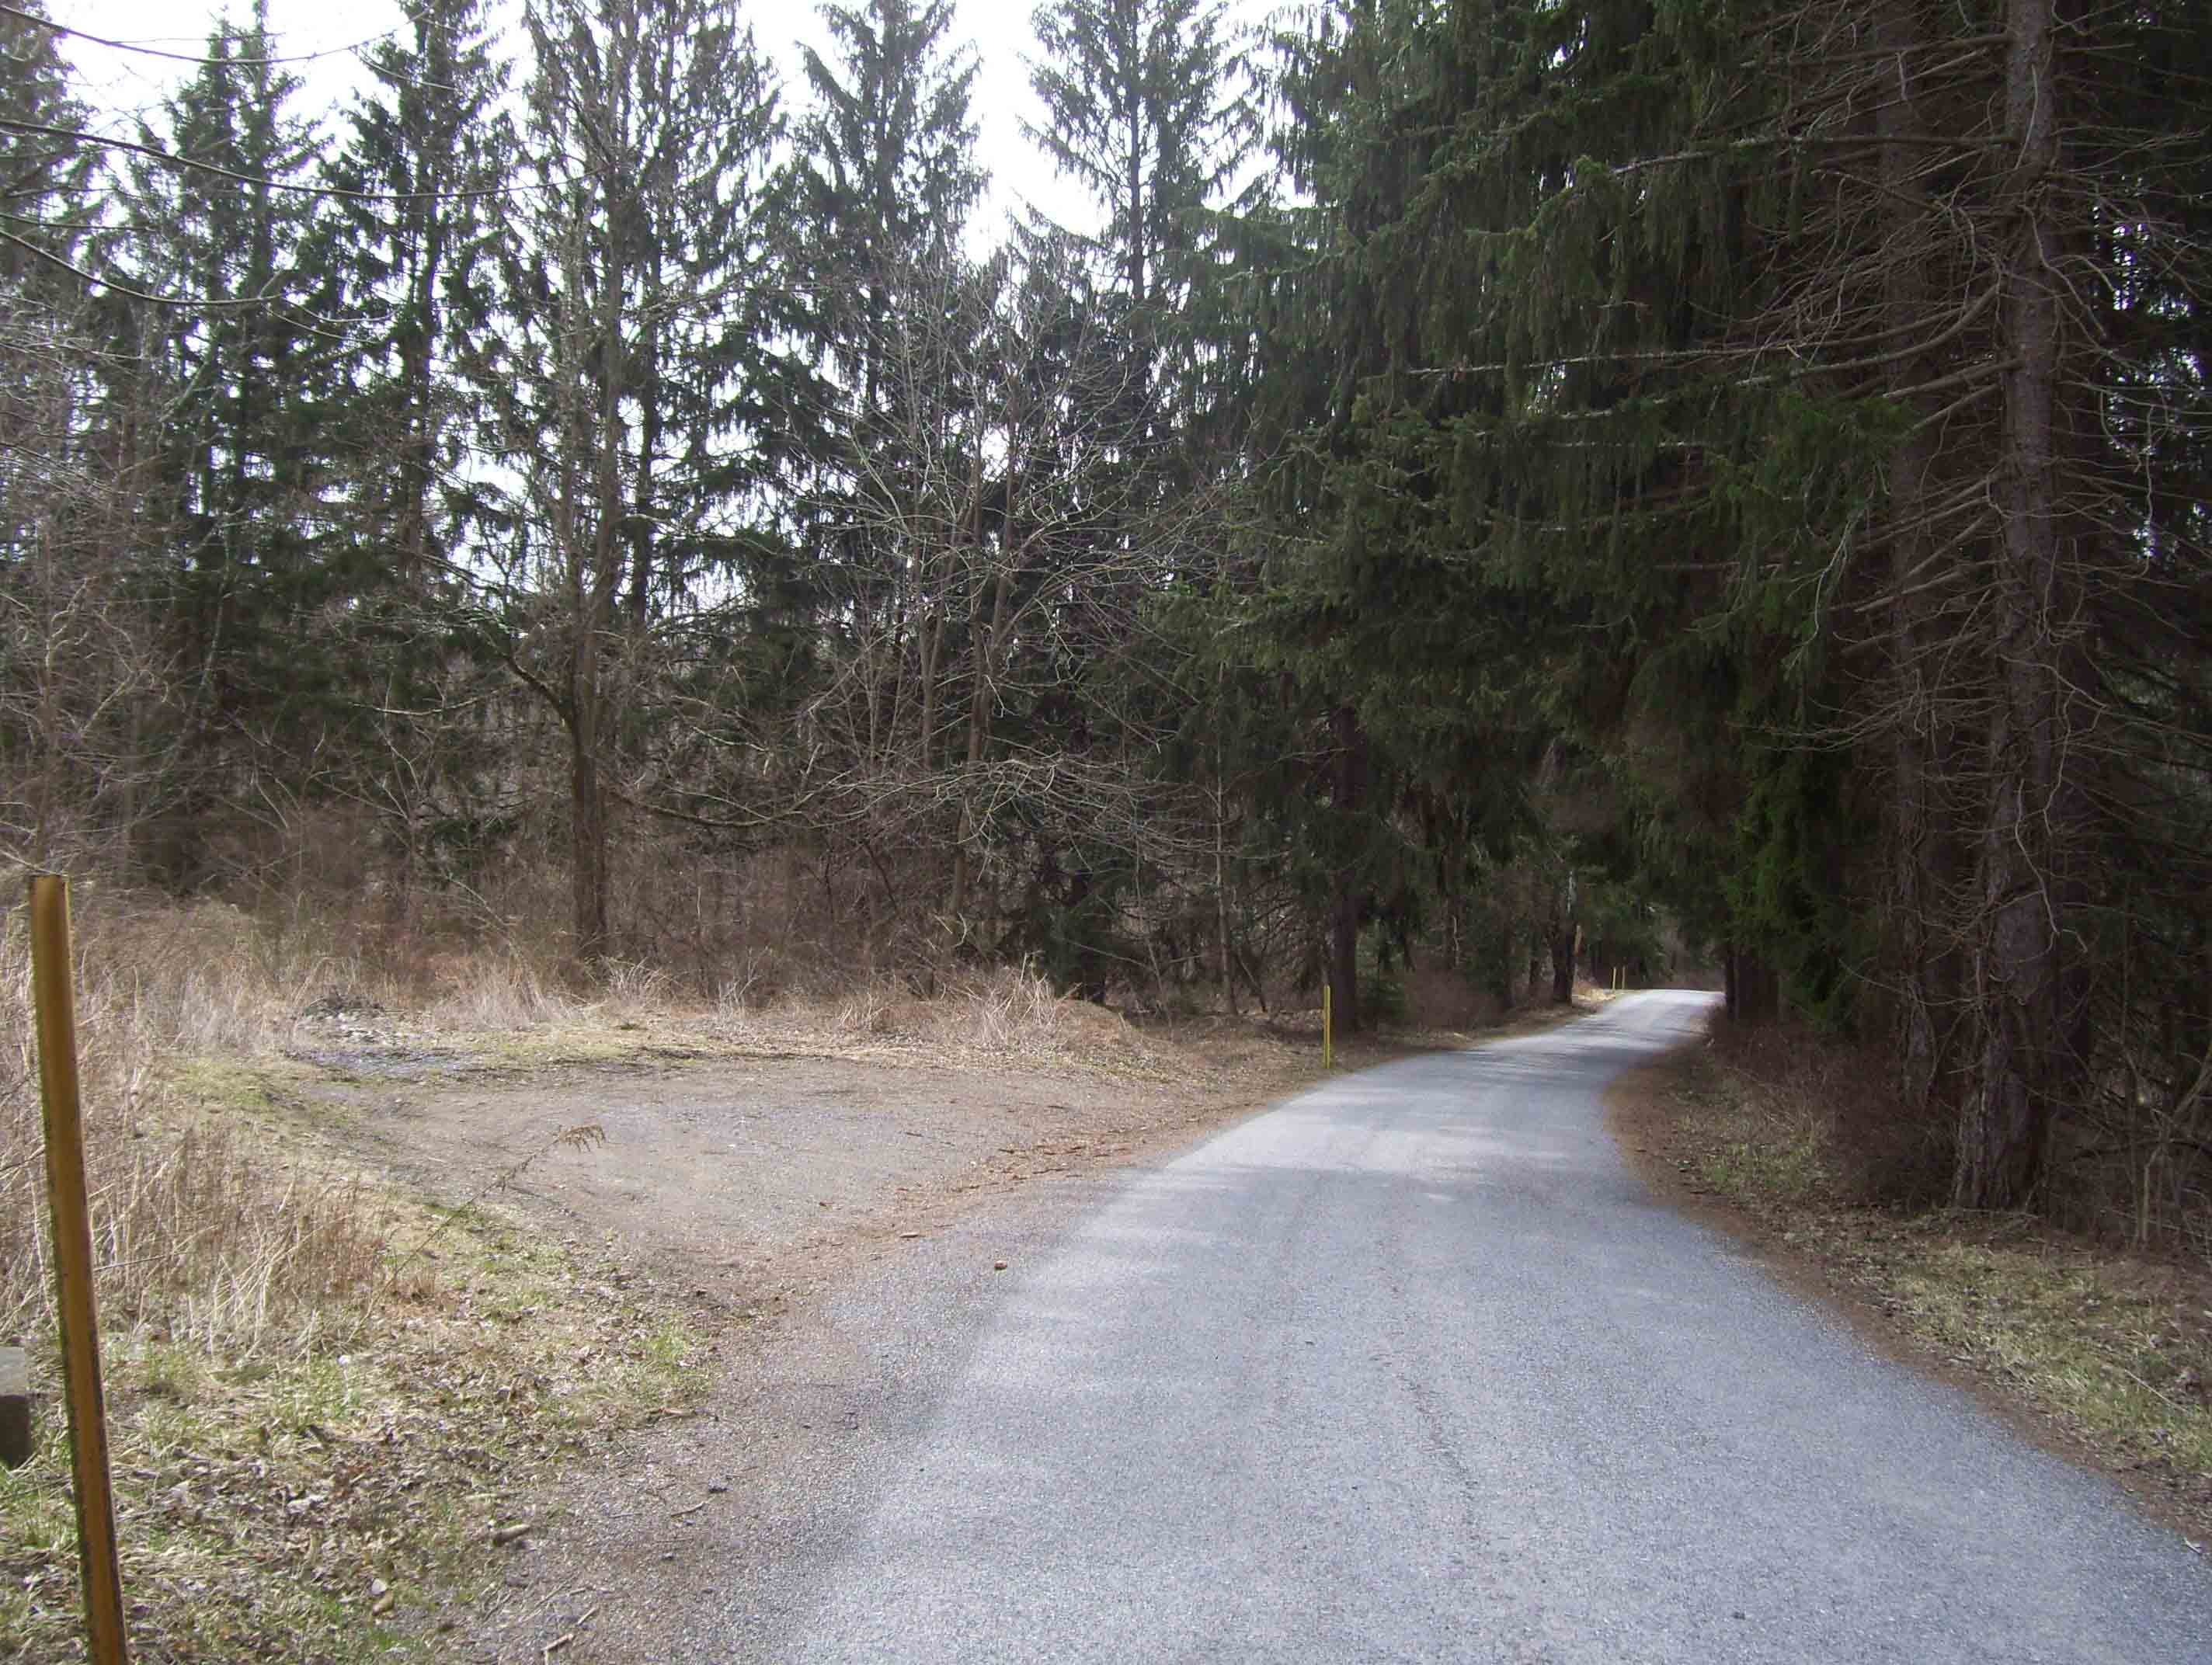 mm 2.0  Michaux Road.  Note parking area on left.   The southbound trail follows Michaux Road for 0.2 miles, then goes left into the old Camp Michaux area.  This parking area is a bit further straight ahead on Michaux Road,  just before the intersection with Bunker Hill Road.  
  Courtesy dlcul@conncoll.edu